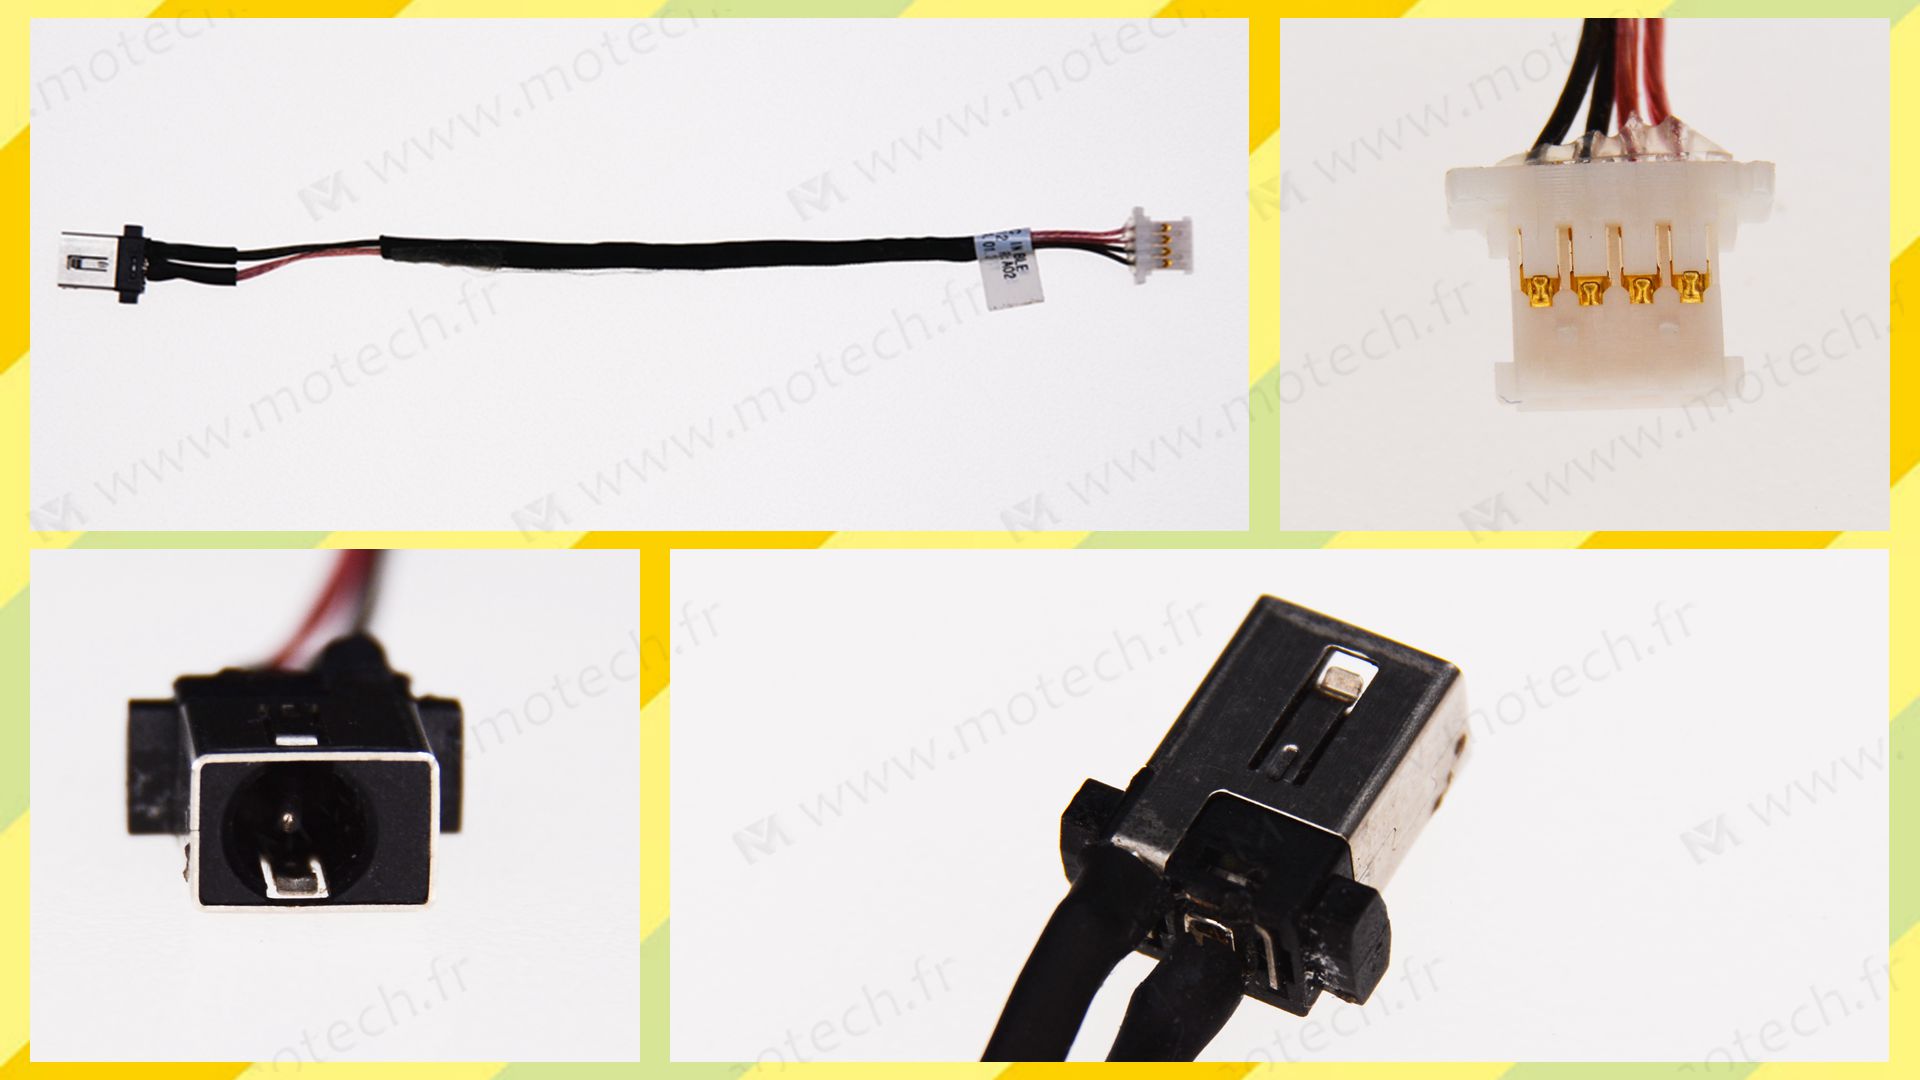 Acer S3-392 MS2385 DC Jack, DC IN Câble Acer S3-392 MS2385, Acer S3-392 MS2385 Jack alimentation, Acer S3-392 MS2385 Power Jack, Acer S3-392 MS2385 Prise Connecteur, Acer S3-392 MS2385 Connecteur alimentation, Acer S3-392 MS2385 connecteur de charge, 